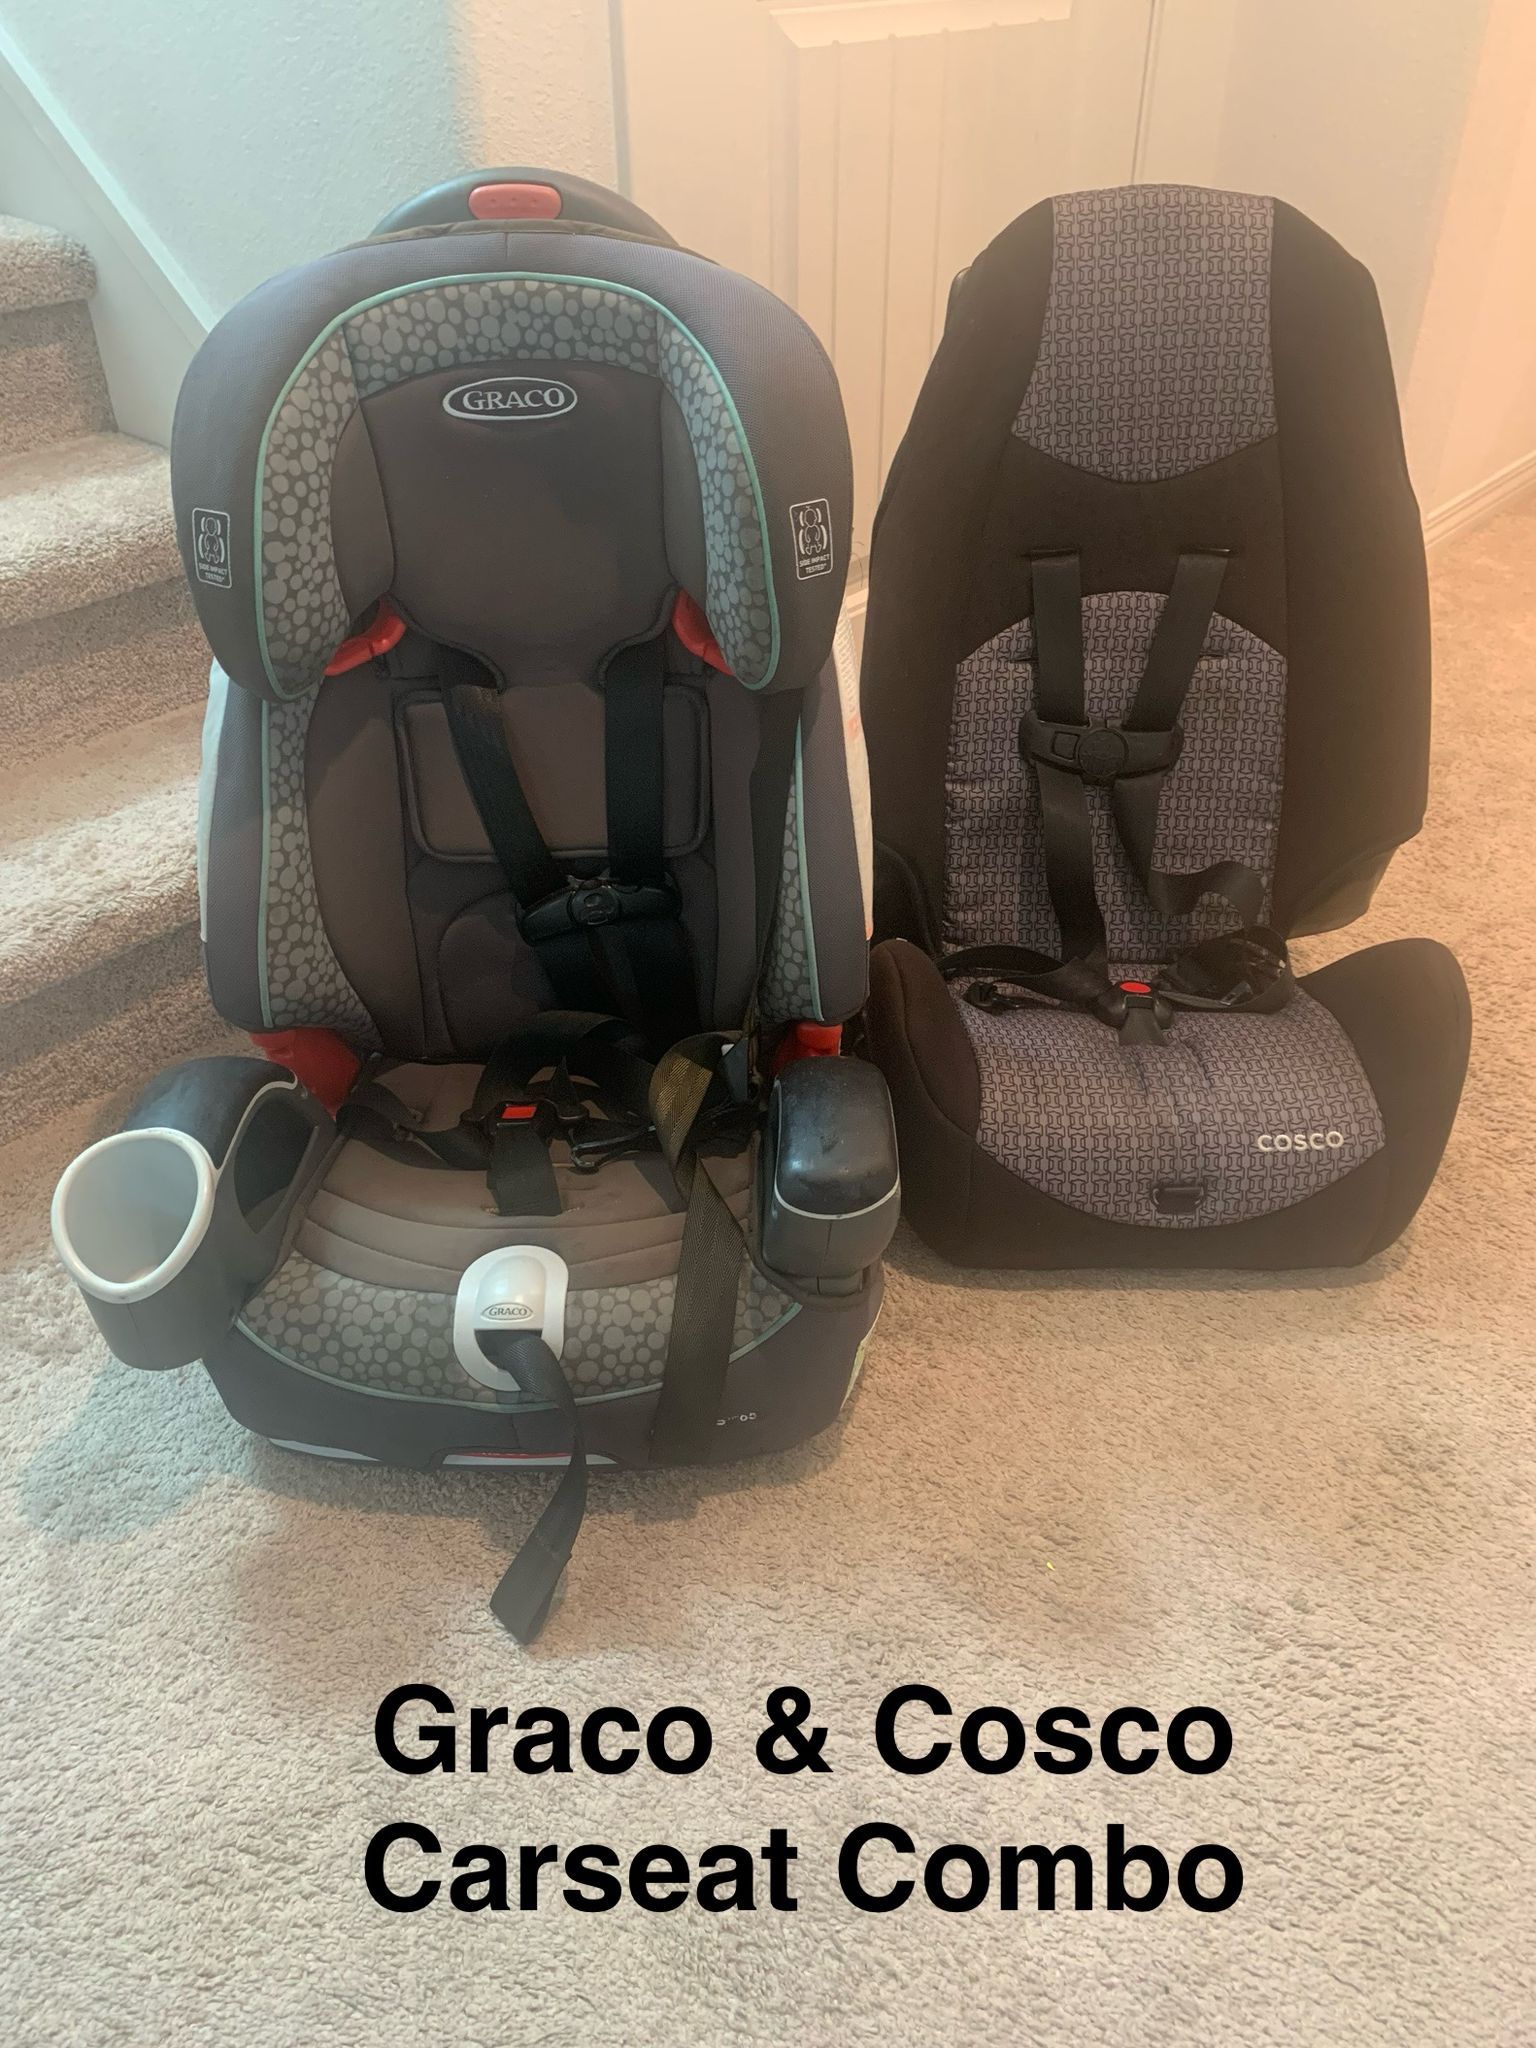 Baby Stroller + Baby Products Combo For Sale- All Included  $350